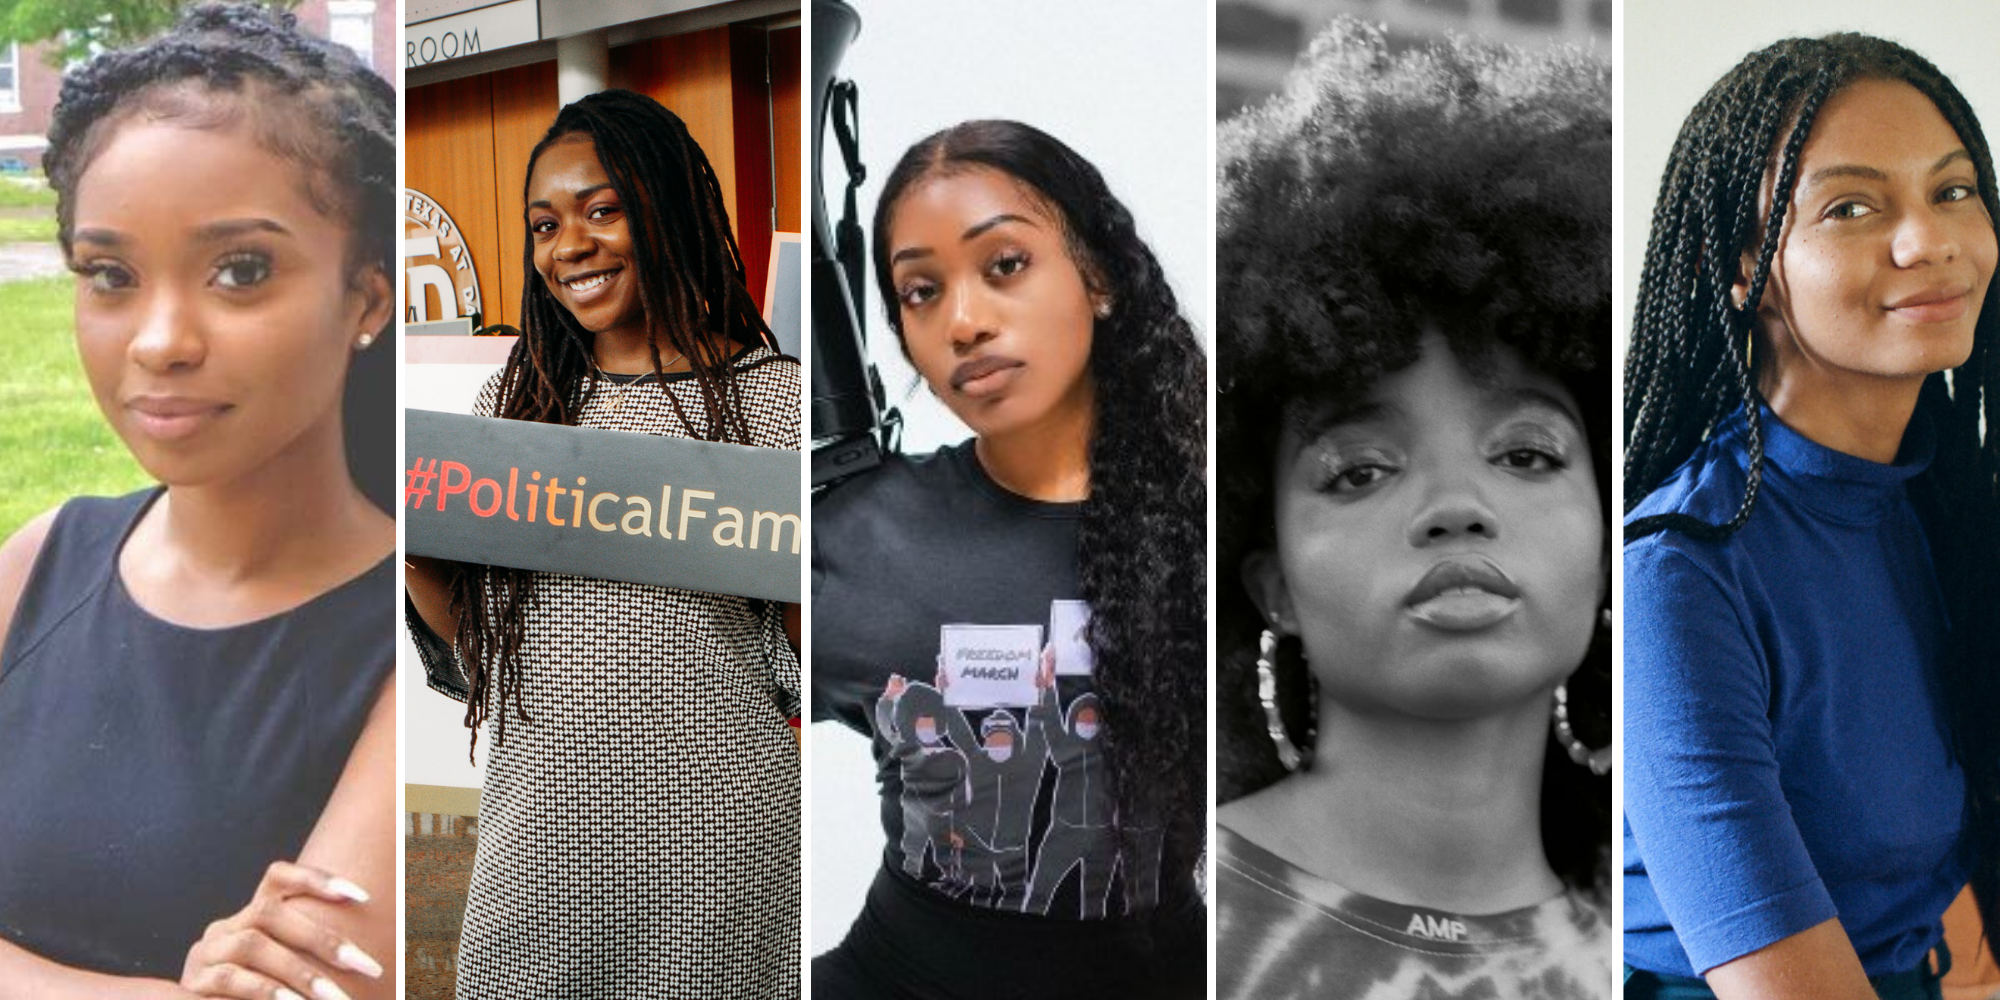 Meet the young Black activists advocating for change